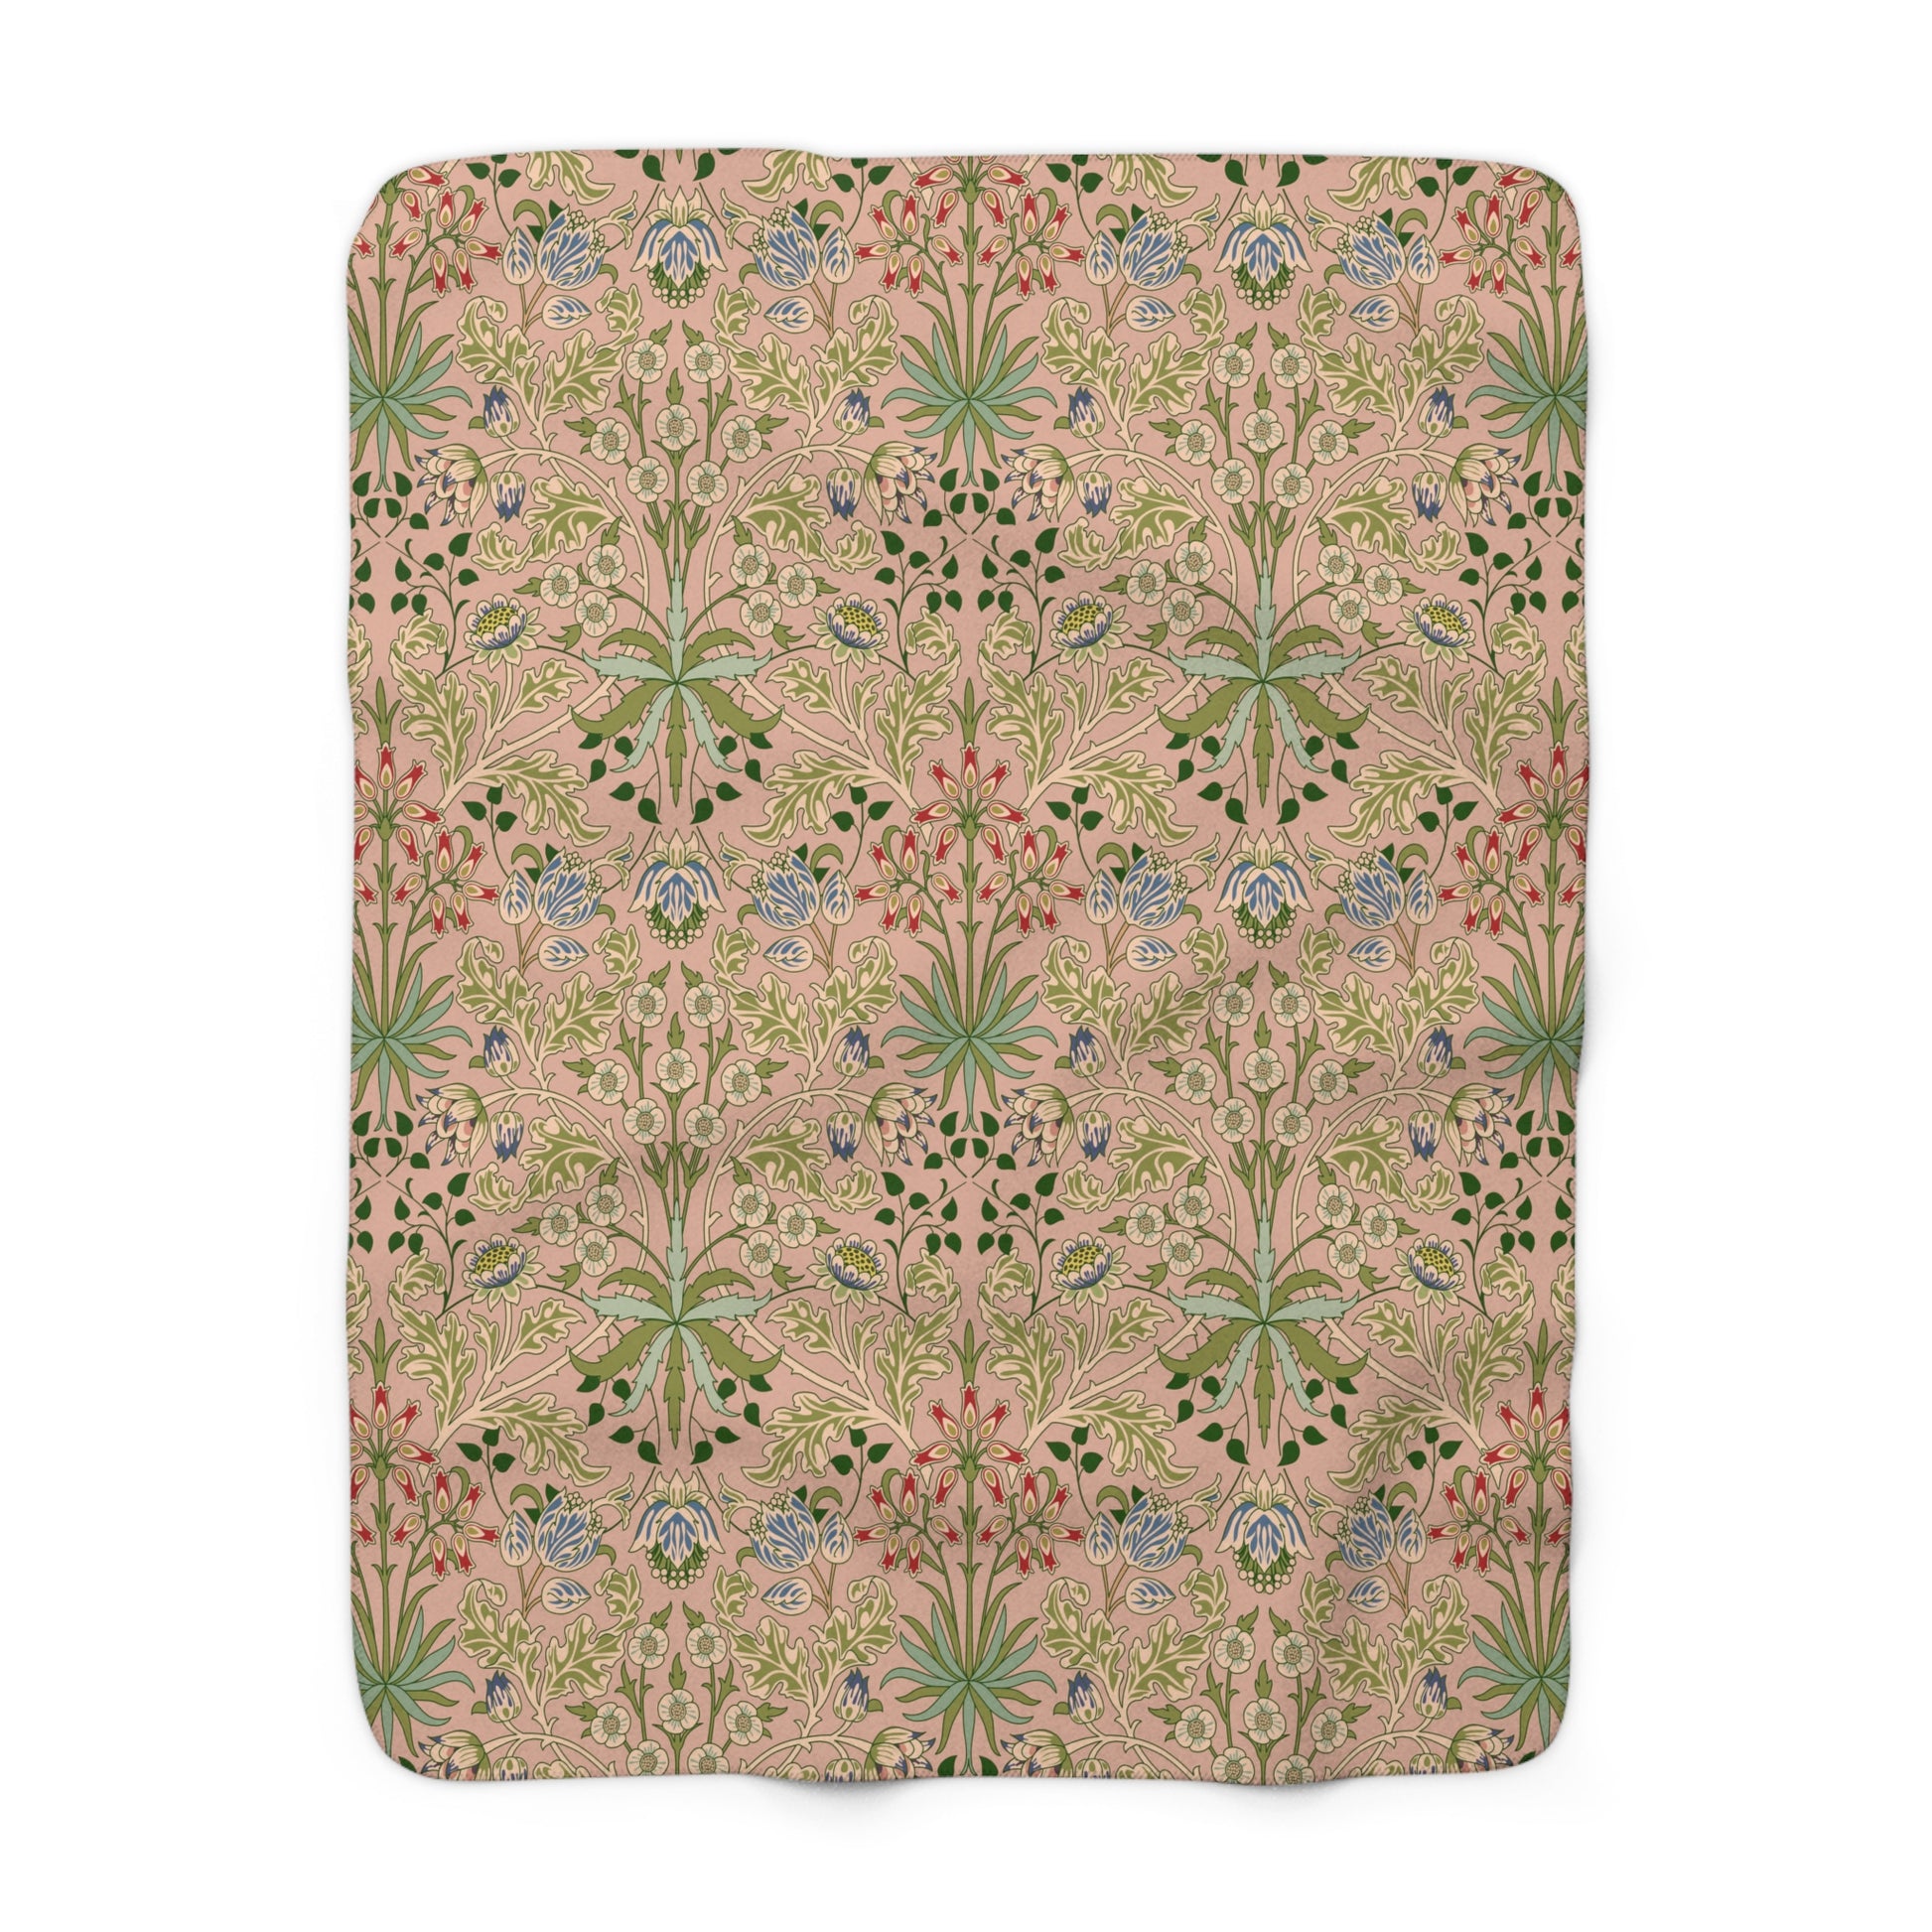 william-morris-co-sherpa-fleece-blanket-hyacinth-collection-blossom-3